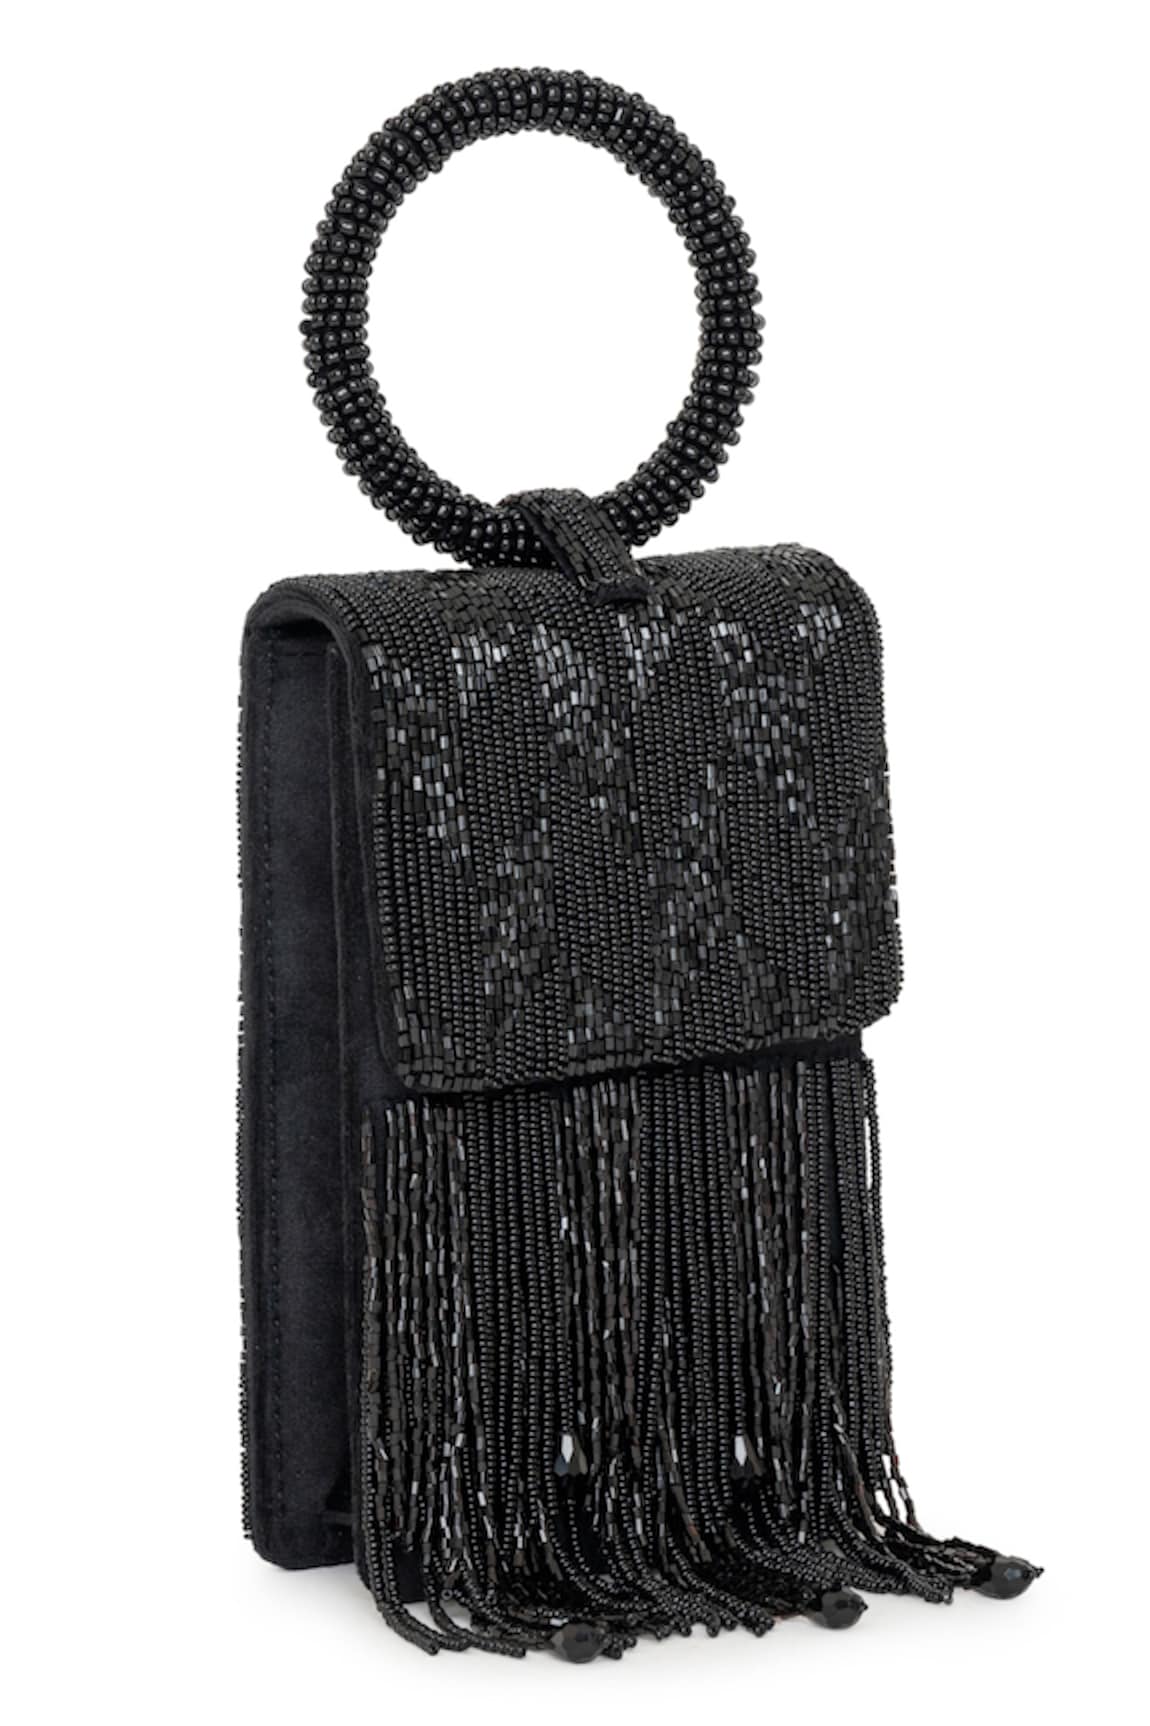 Beau Monde Nora Crystal Embellished Clutch With Sling Chain